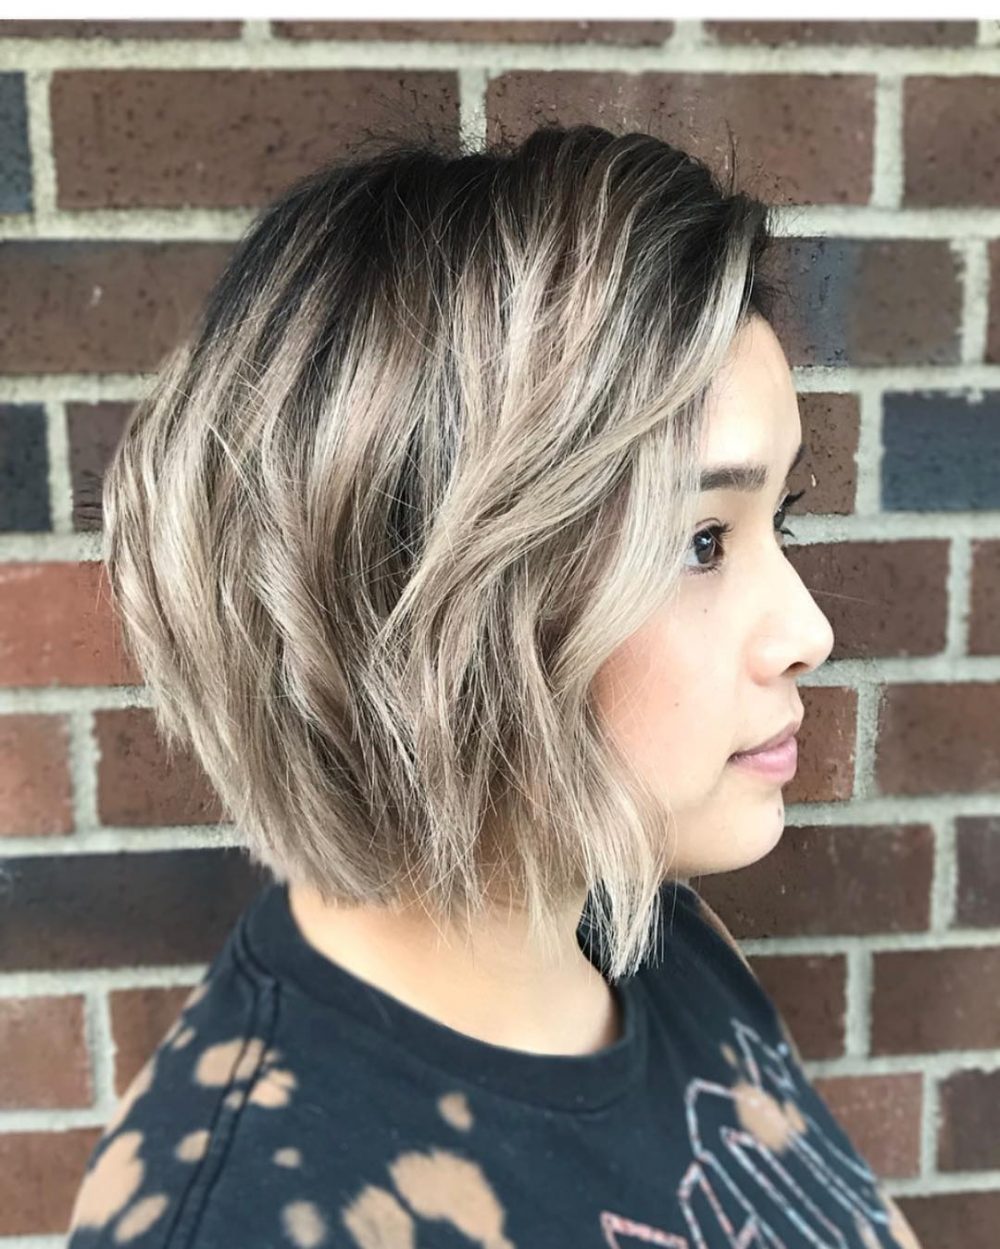 Chic Chin-Length Bob for a Round Faced Girl